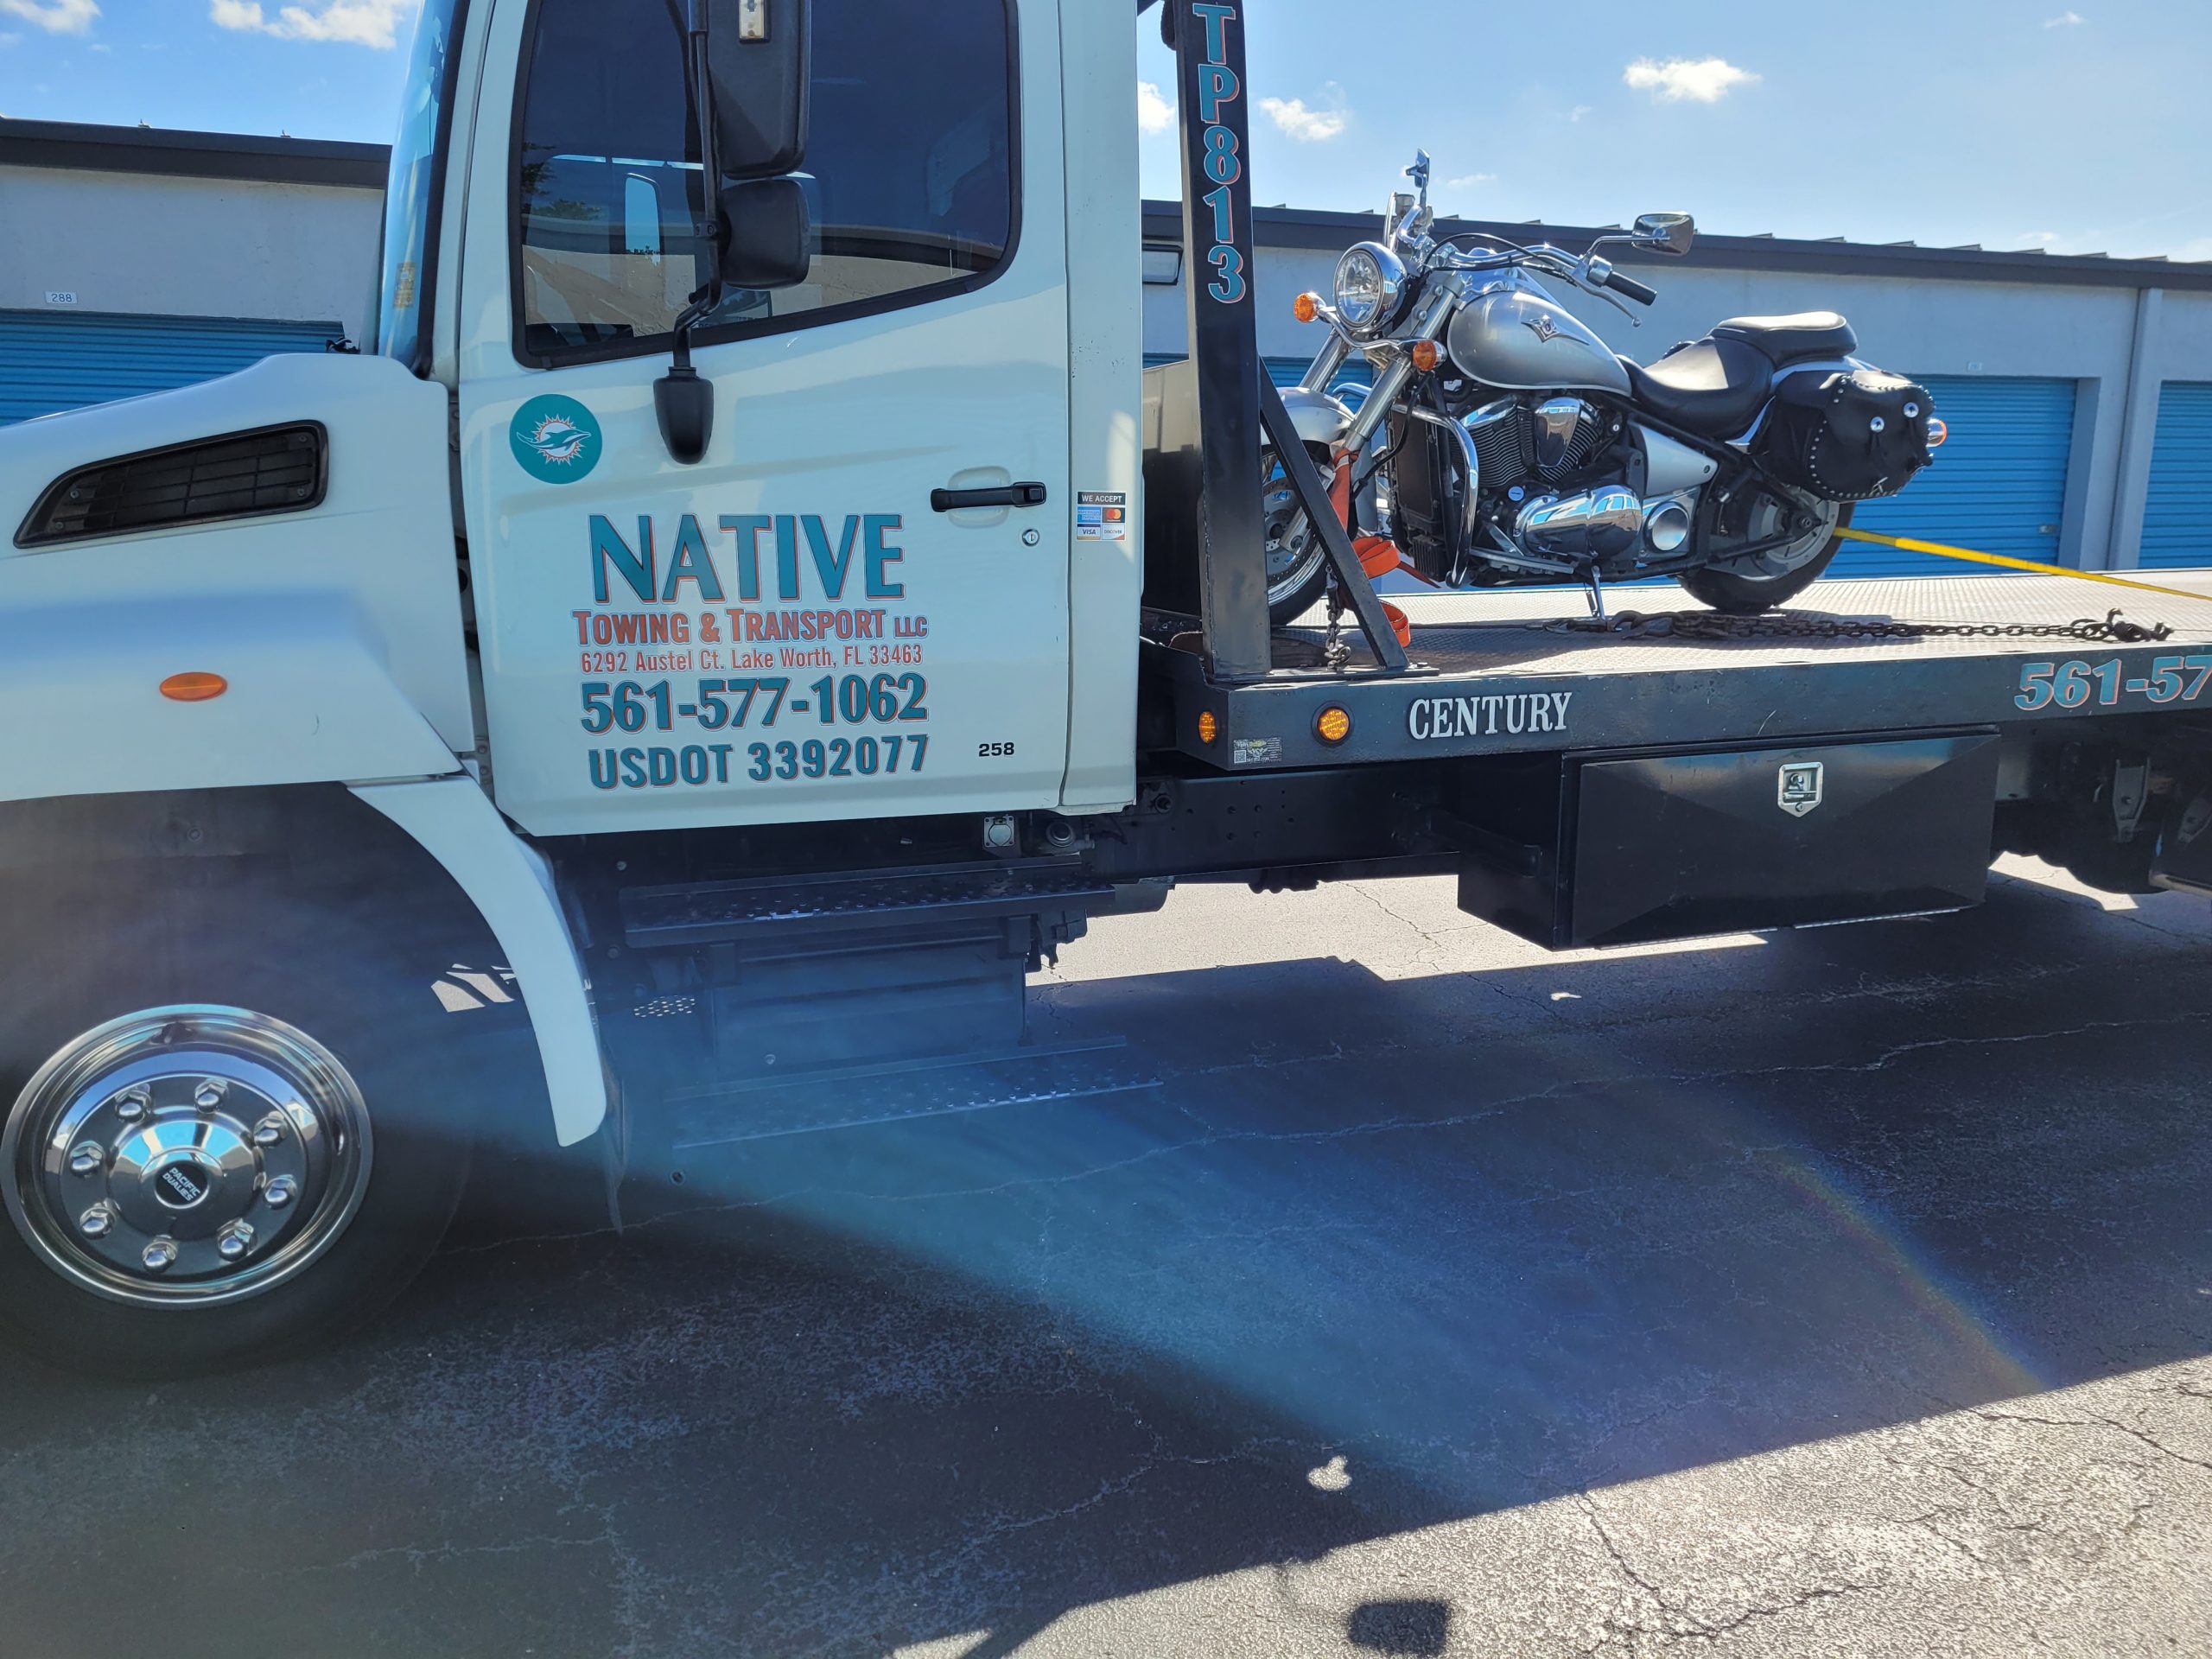 Motorcycle Towing in West Palm Beach